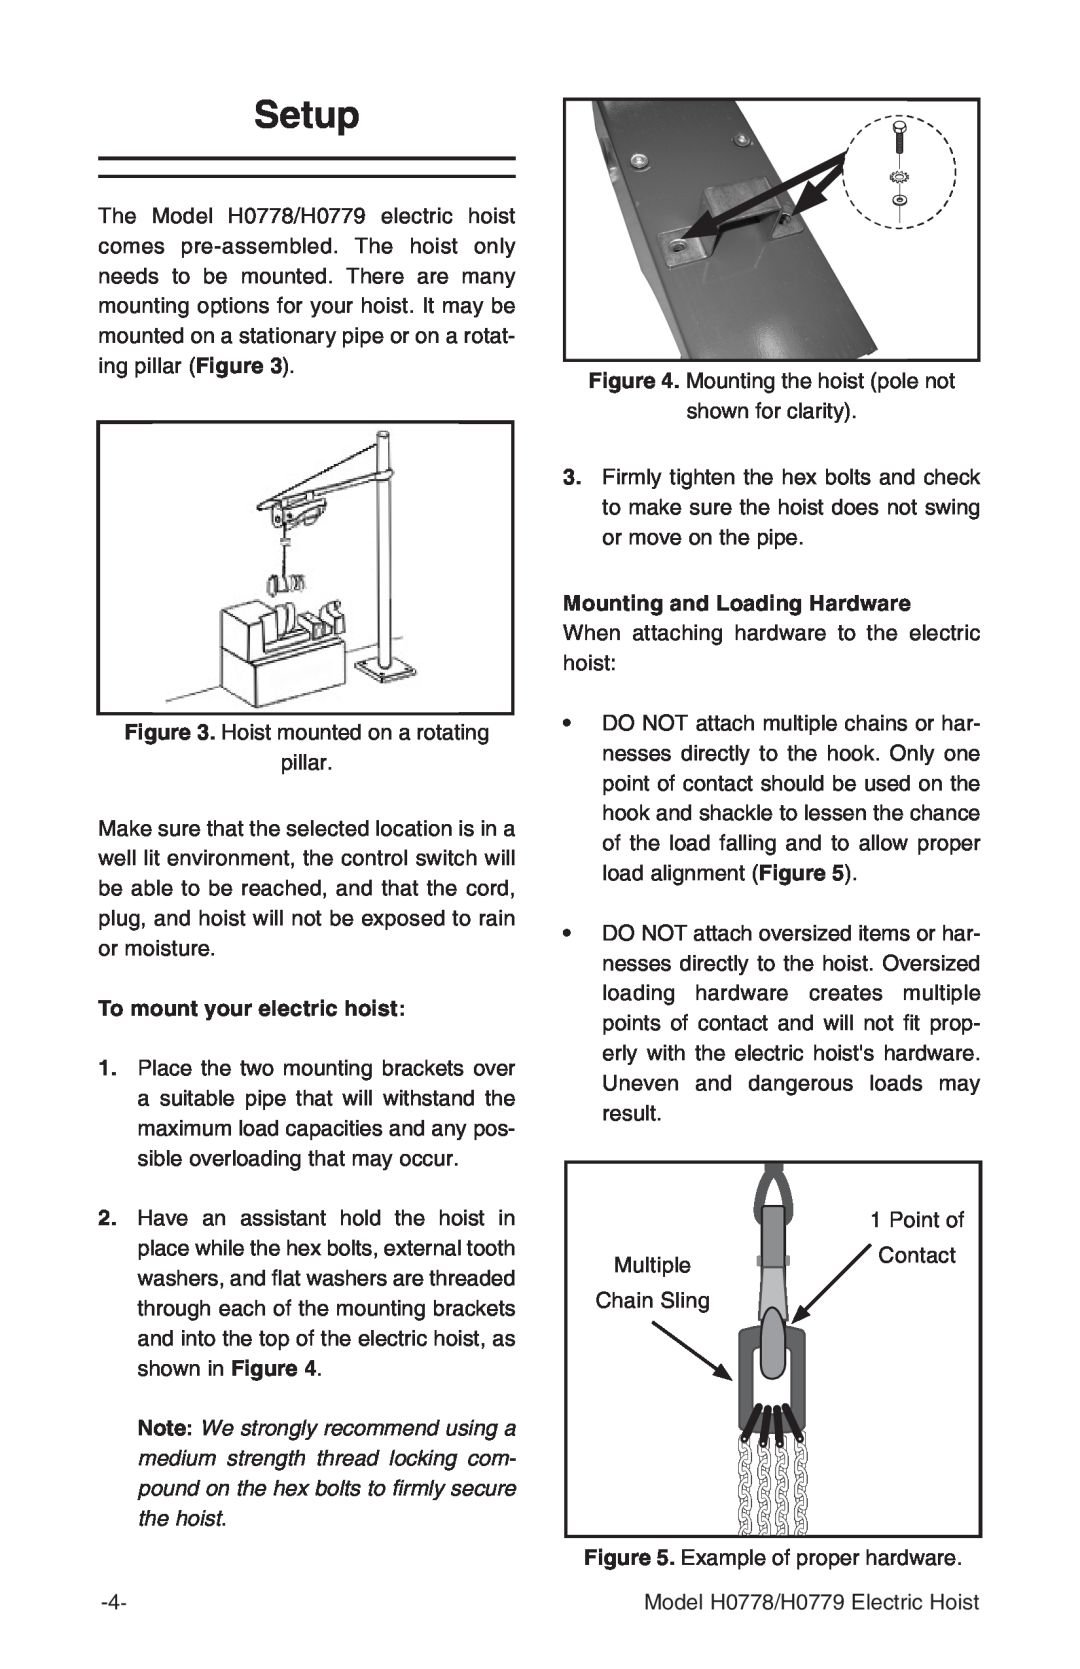 Grizzly H0778, H0779 owner manual Setup, To mount your electric hoist, Mounting and Loading Hardware 